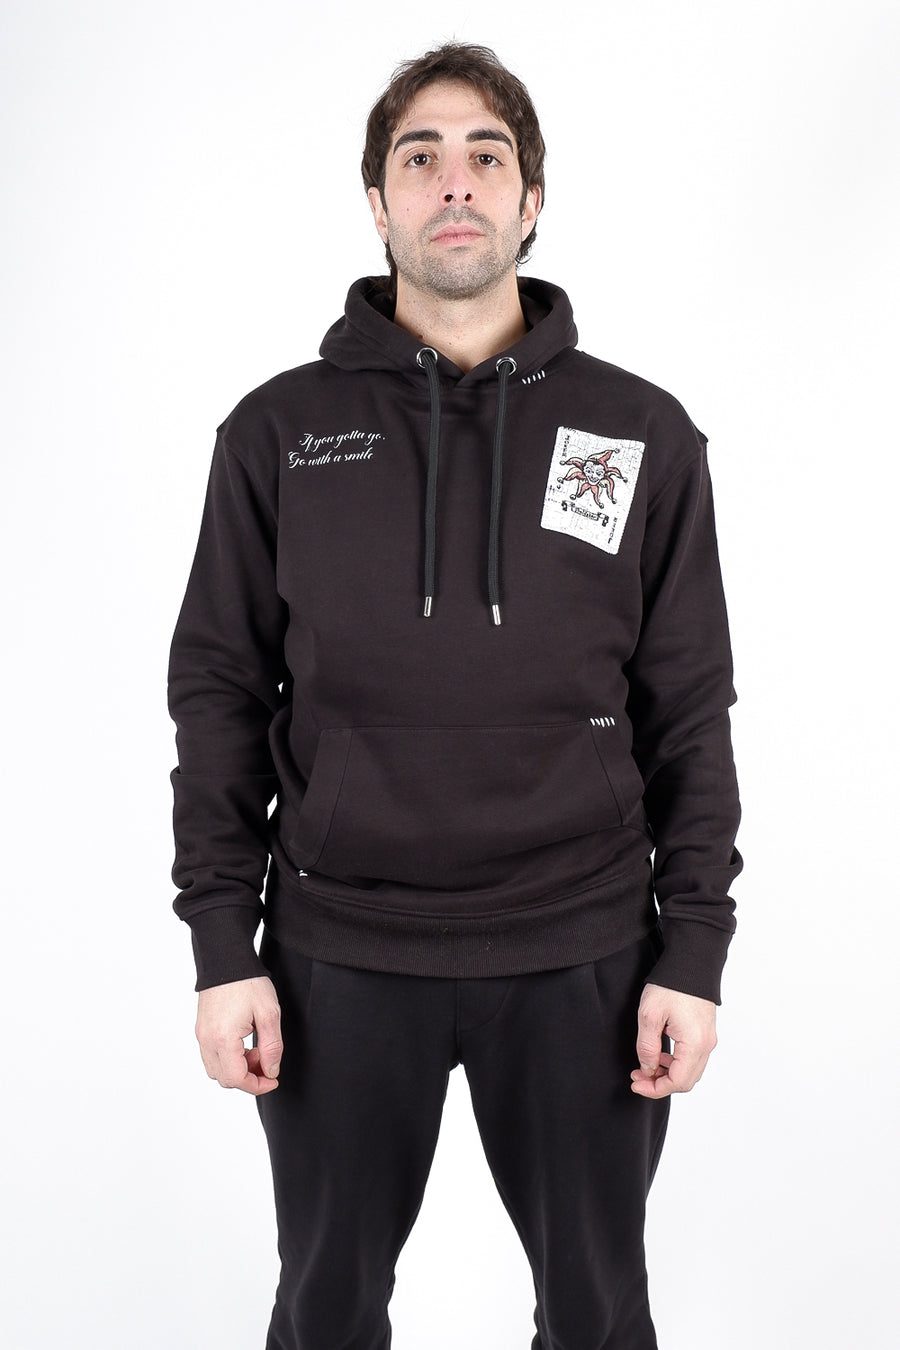 Buy the ABE Joker 2.0 Hoodie Black at Intro. Spend £50 for free UK delivery. Official stockists. We ship worldwide.